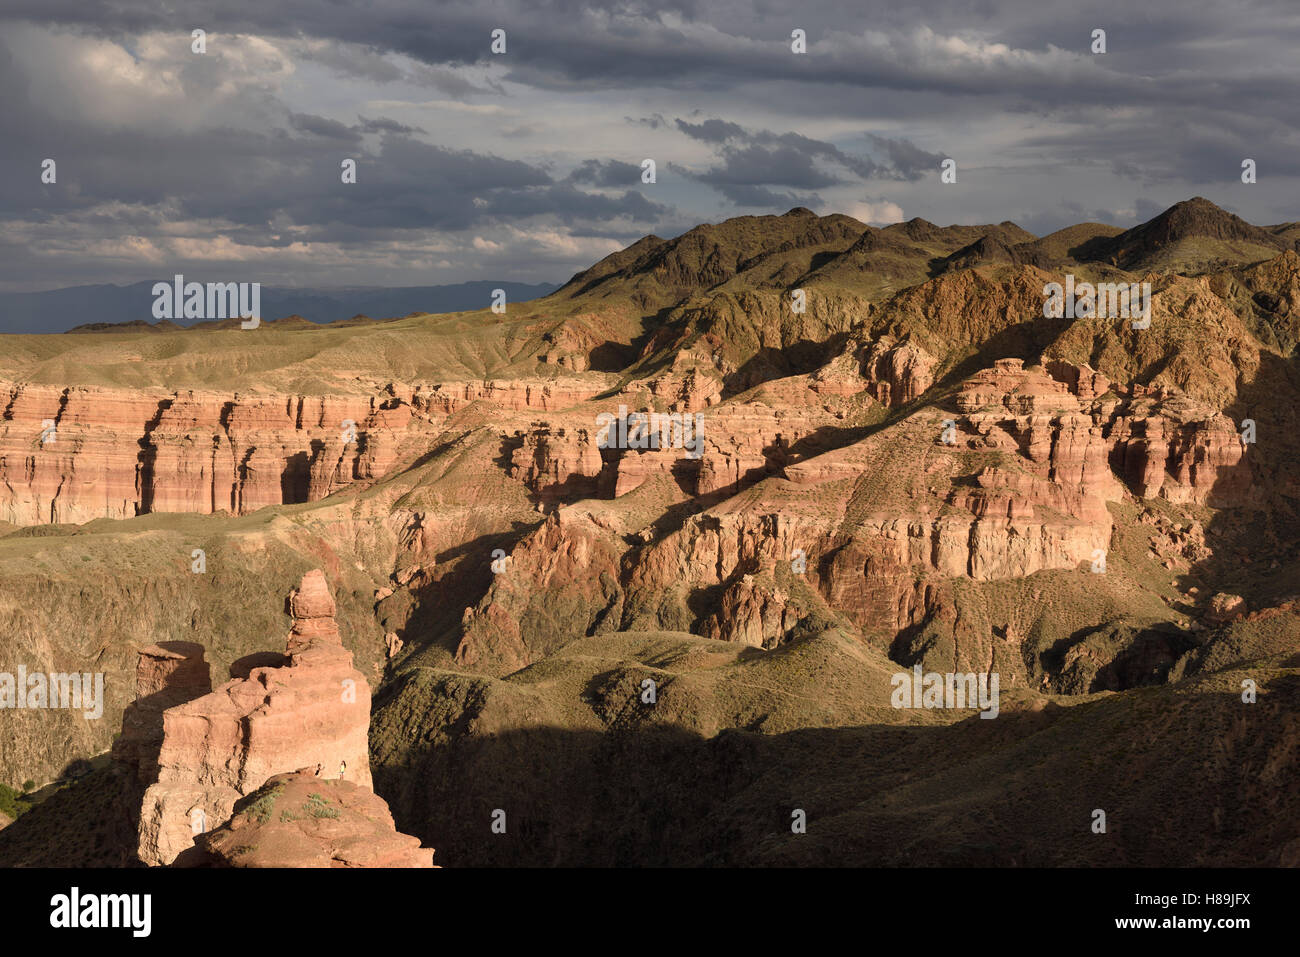 Couple taking picture at sunset on top of Hoodoo at Charyn Canyon Kazakhstan Stock Photo